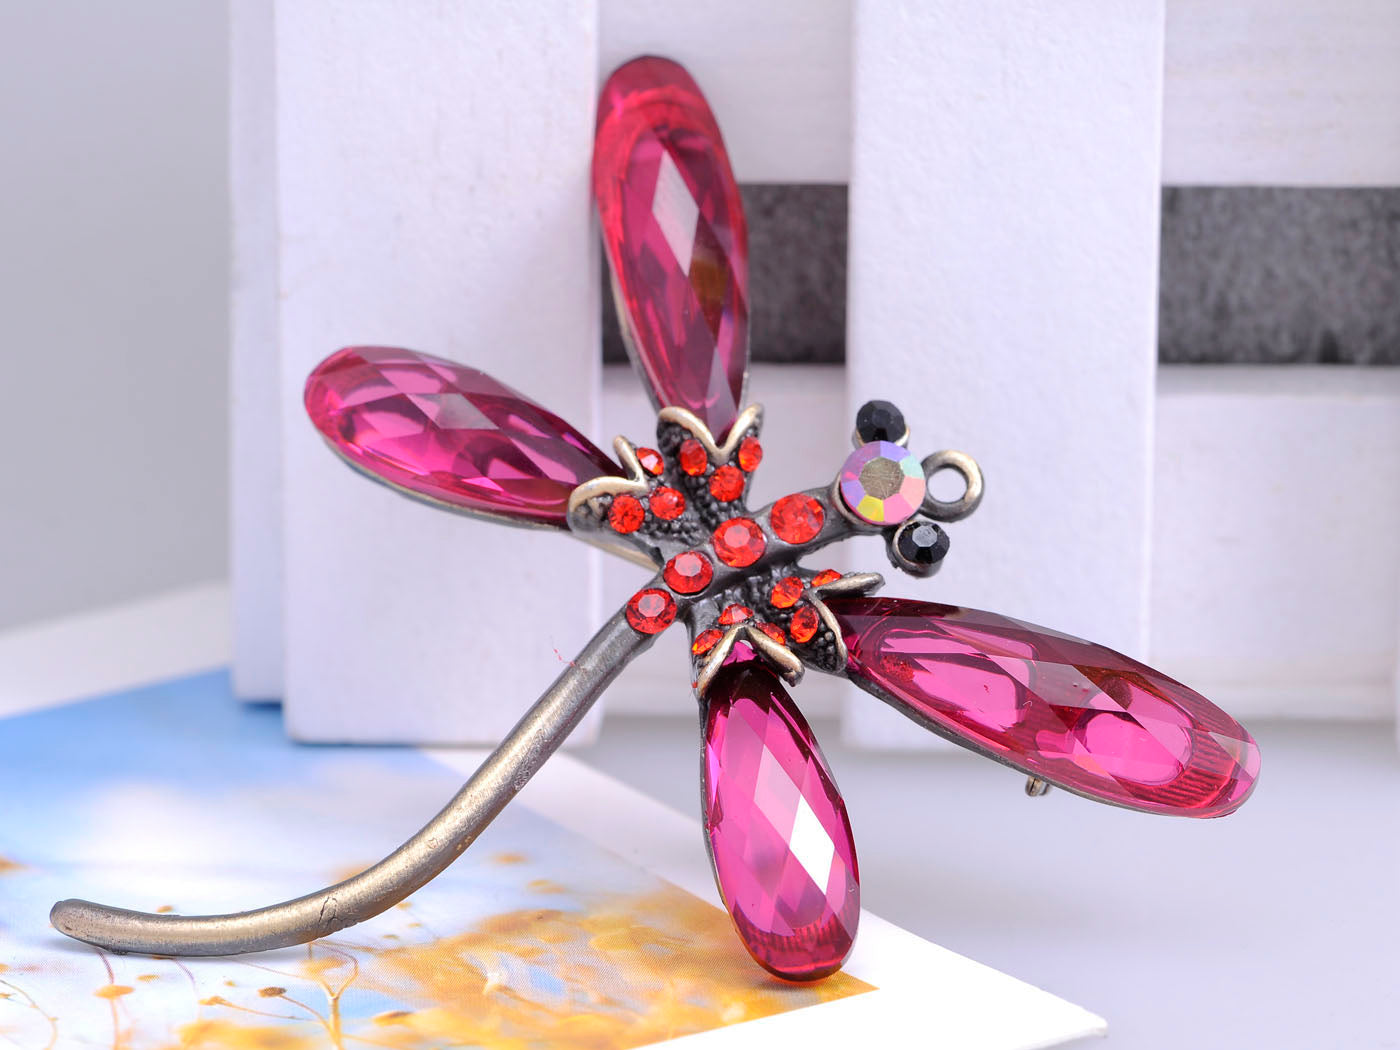 Craft Ruby Red Light Siam Jewel Dragonfly Tiny Brooch Pin Pendant